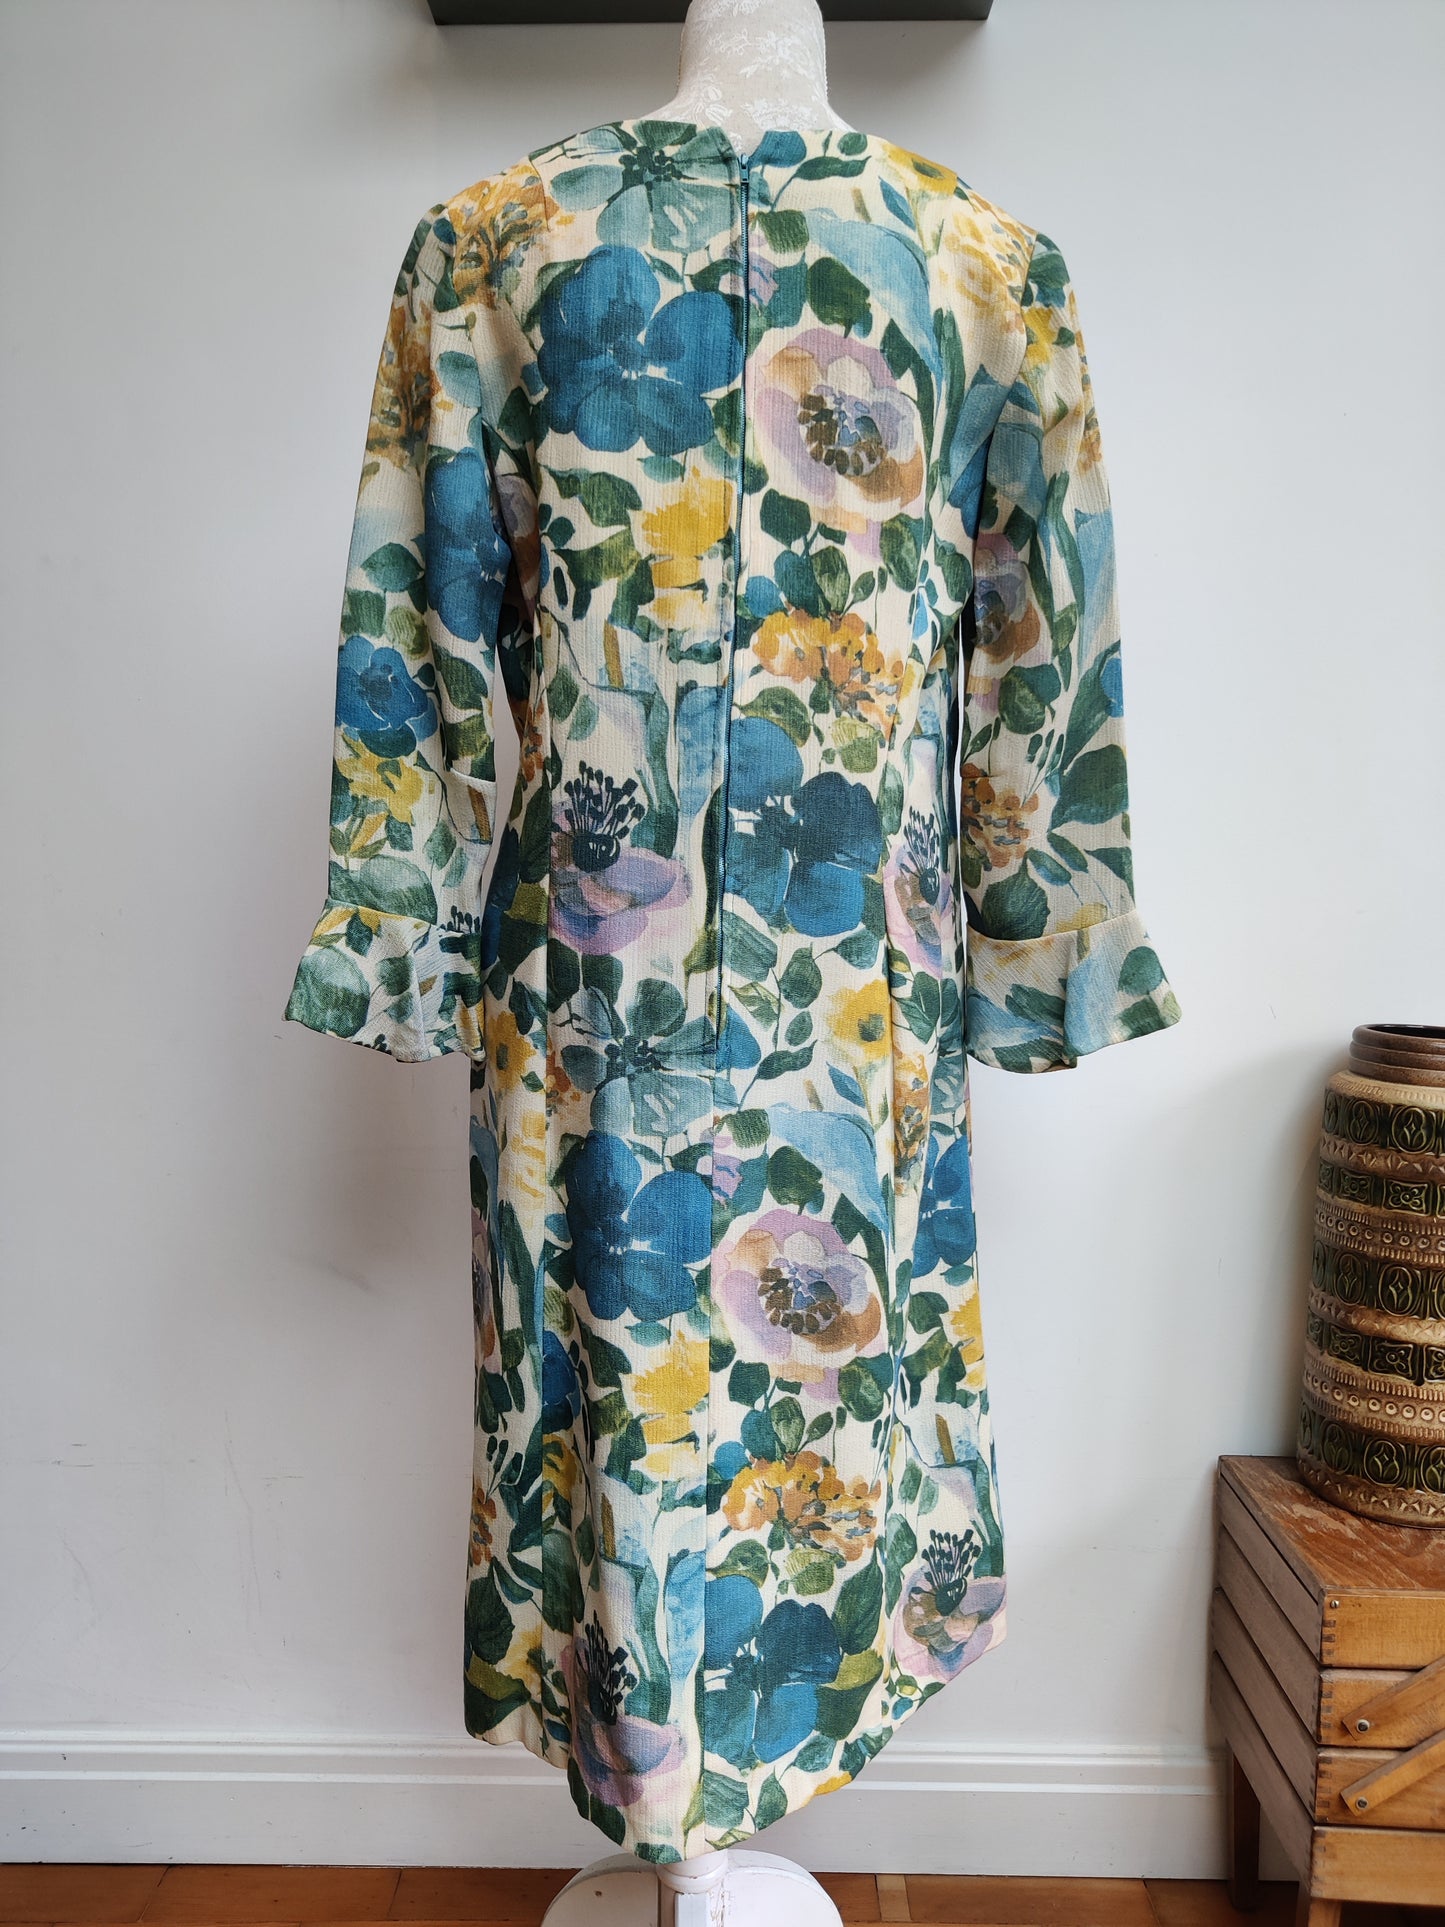 Stunning 50s floral dress with flared sleeves. Size 16.